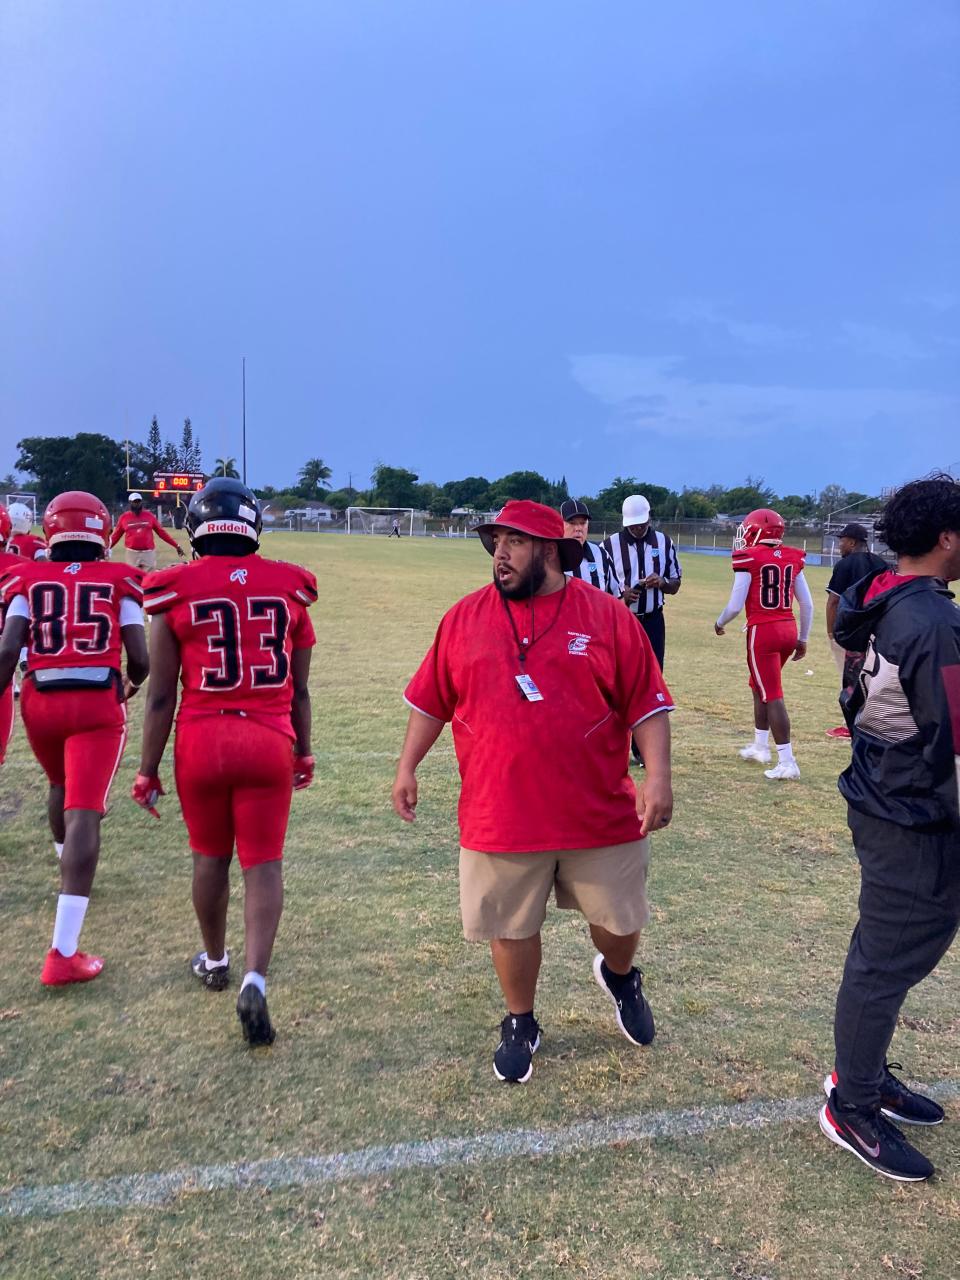 Santaluces head coach Hector Clavijo prepares his team to play against South Broward in spring football competition on Thursday in Lantana.